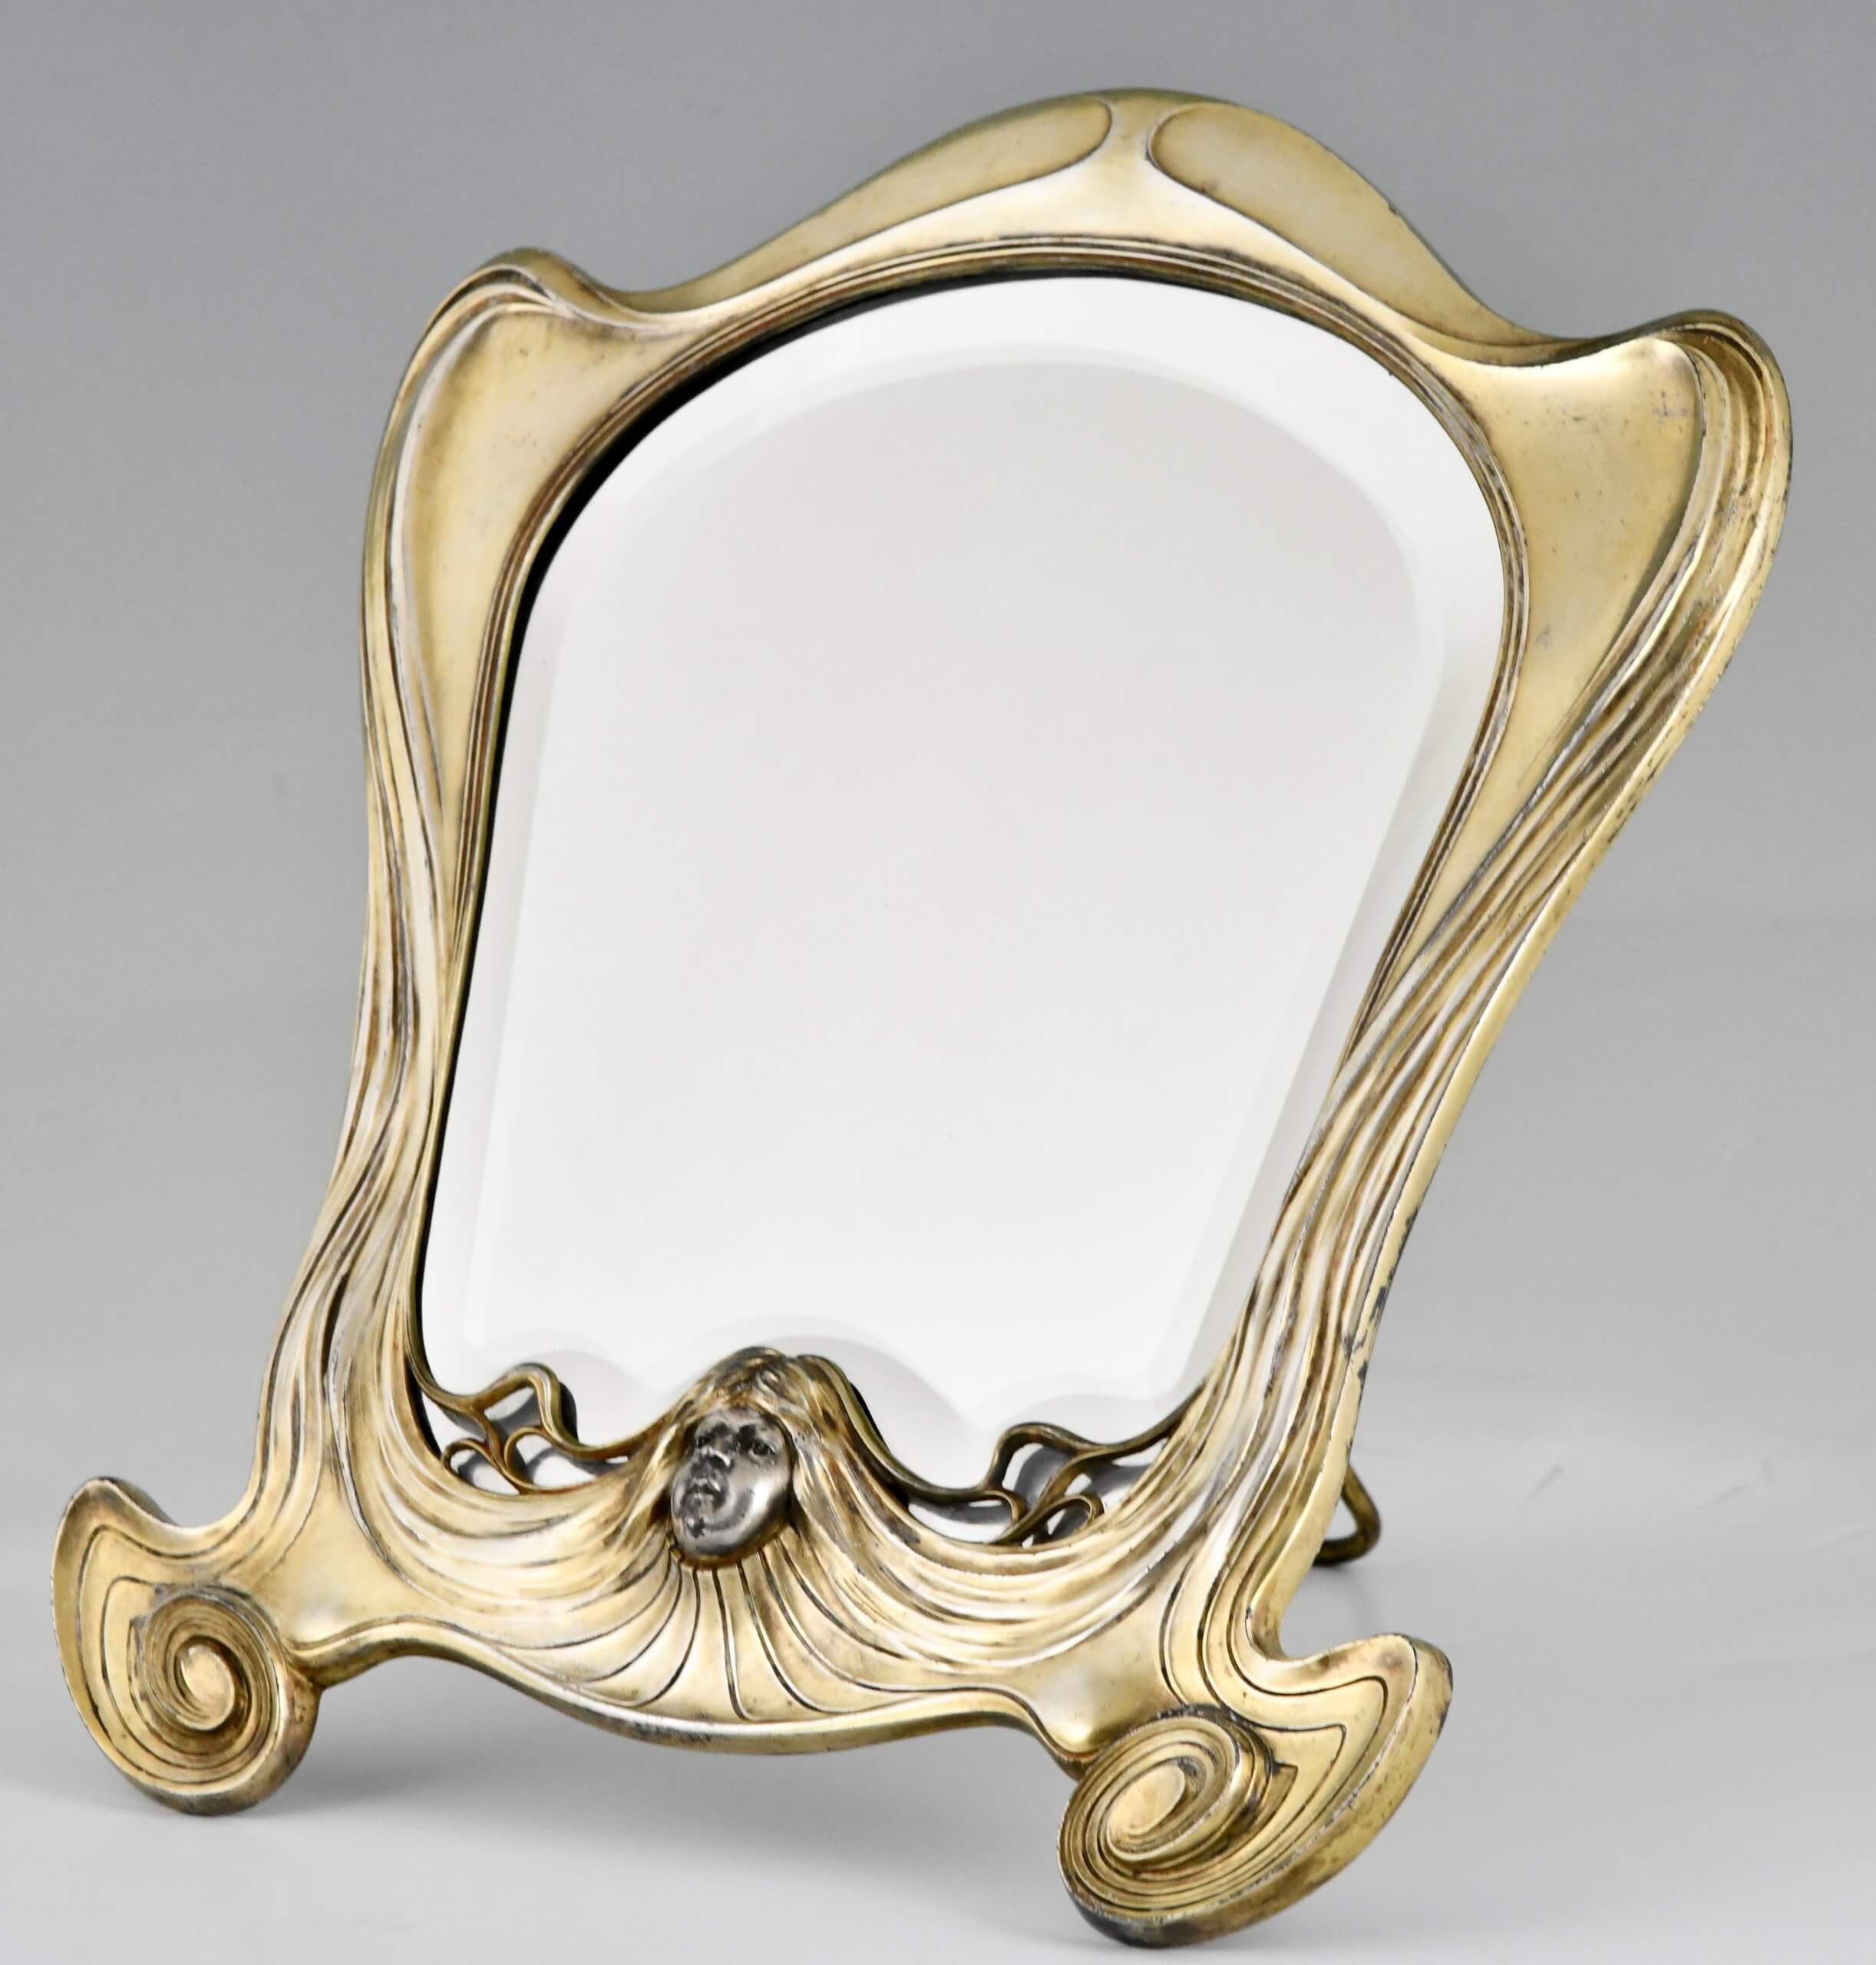 Art Nouveau mirror with face of a woman